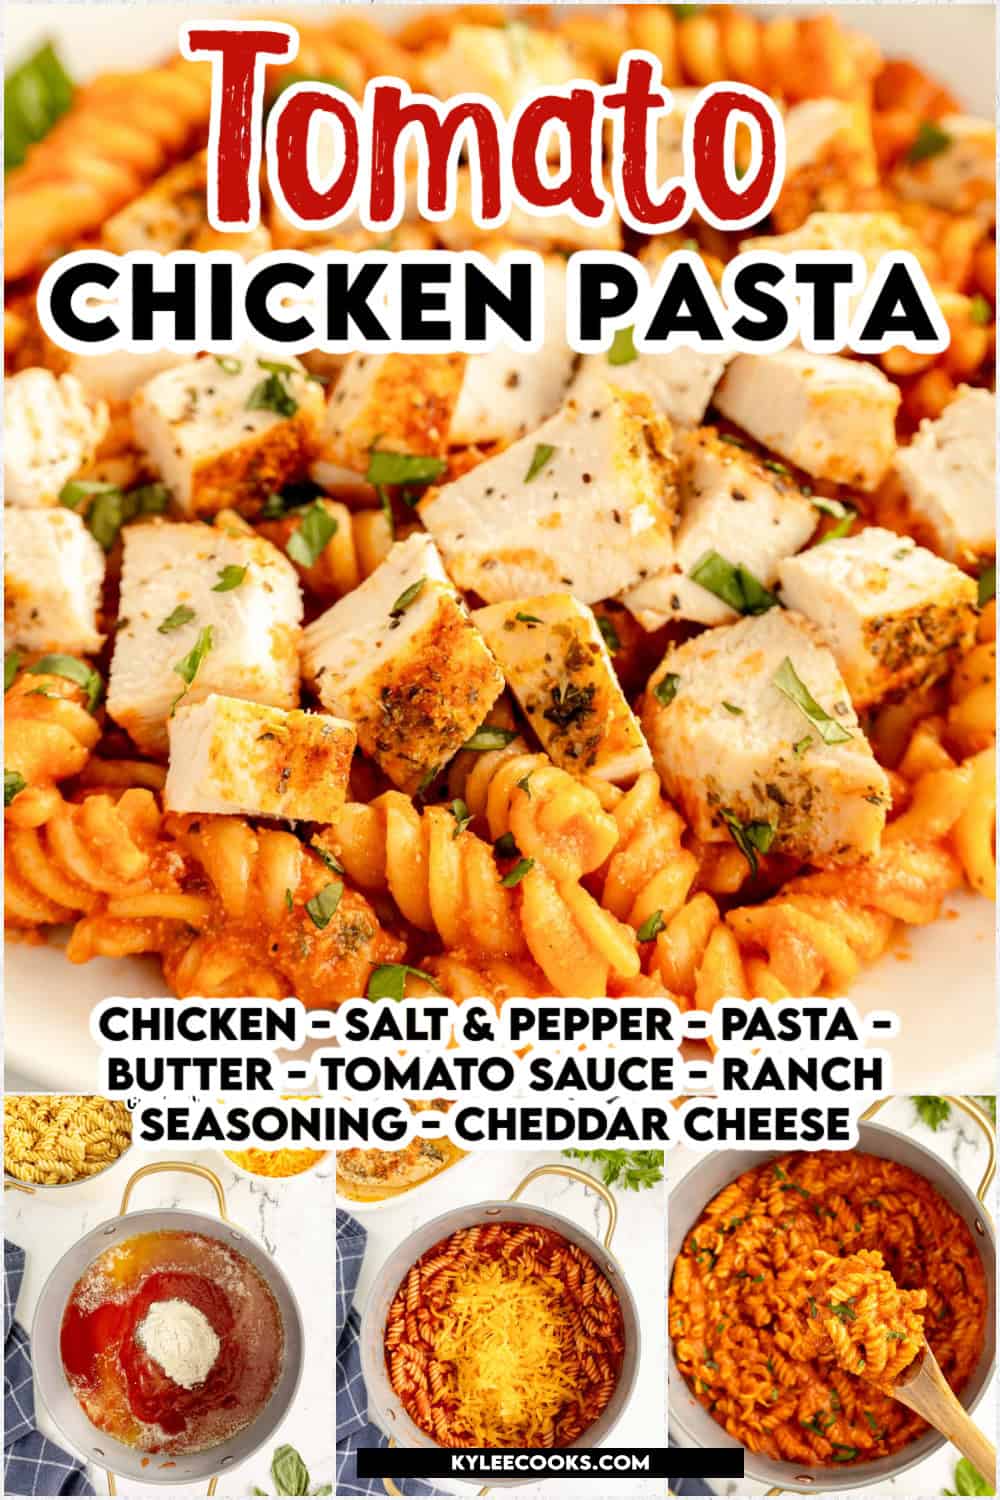 tomato chicken pasta in a bowl with recipe name and ingredients overlaid in text.